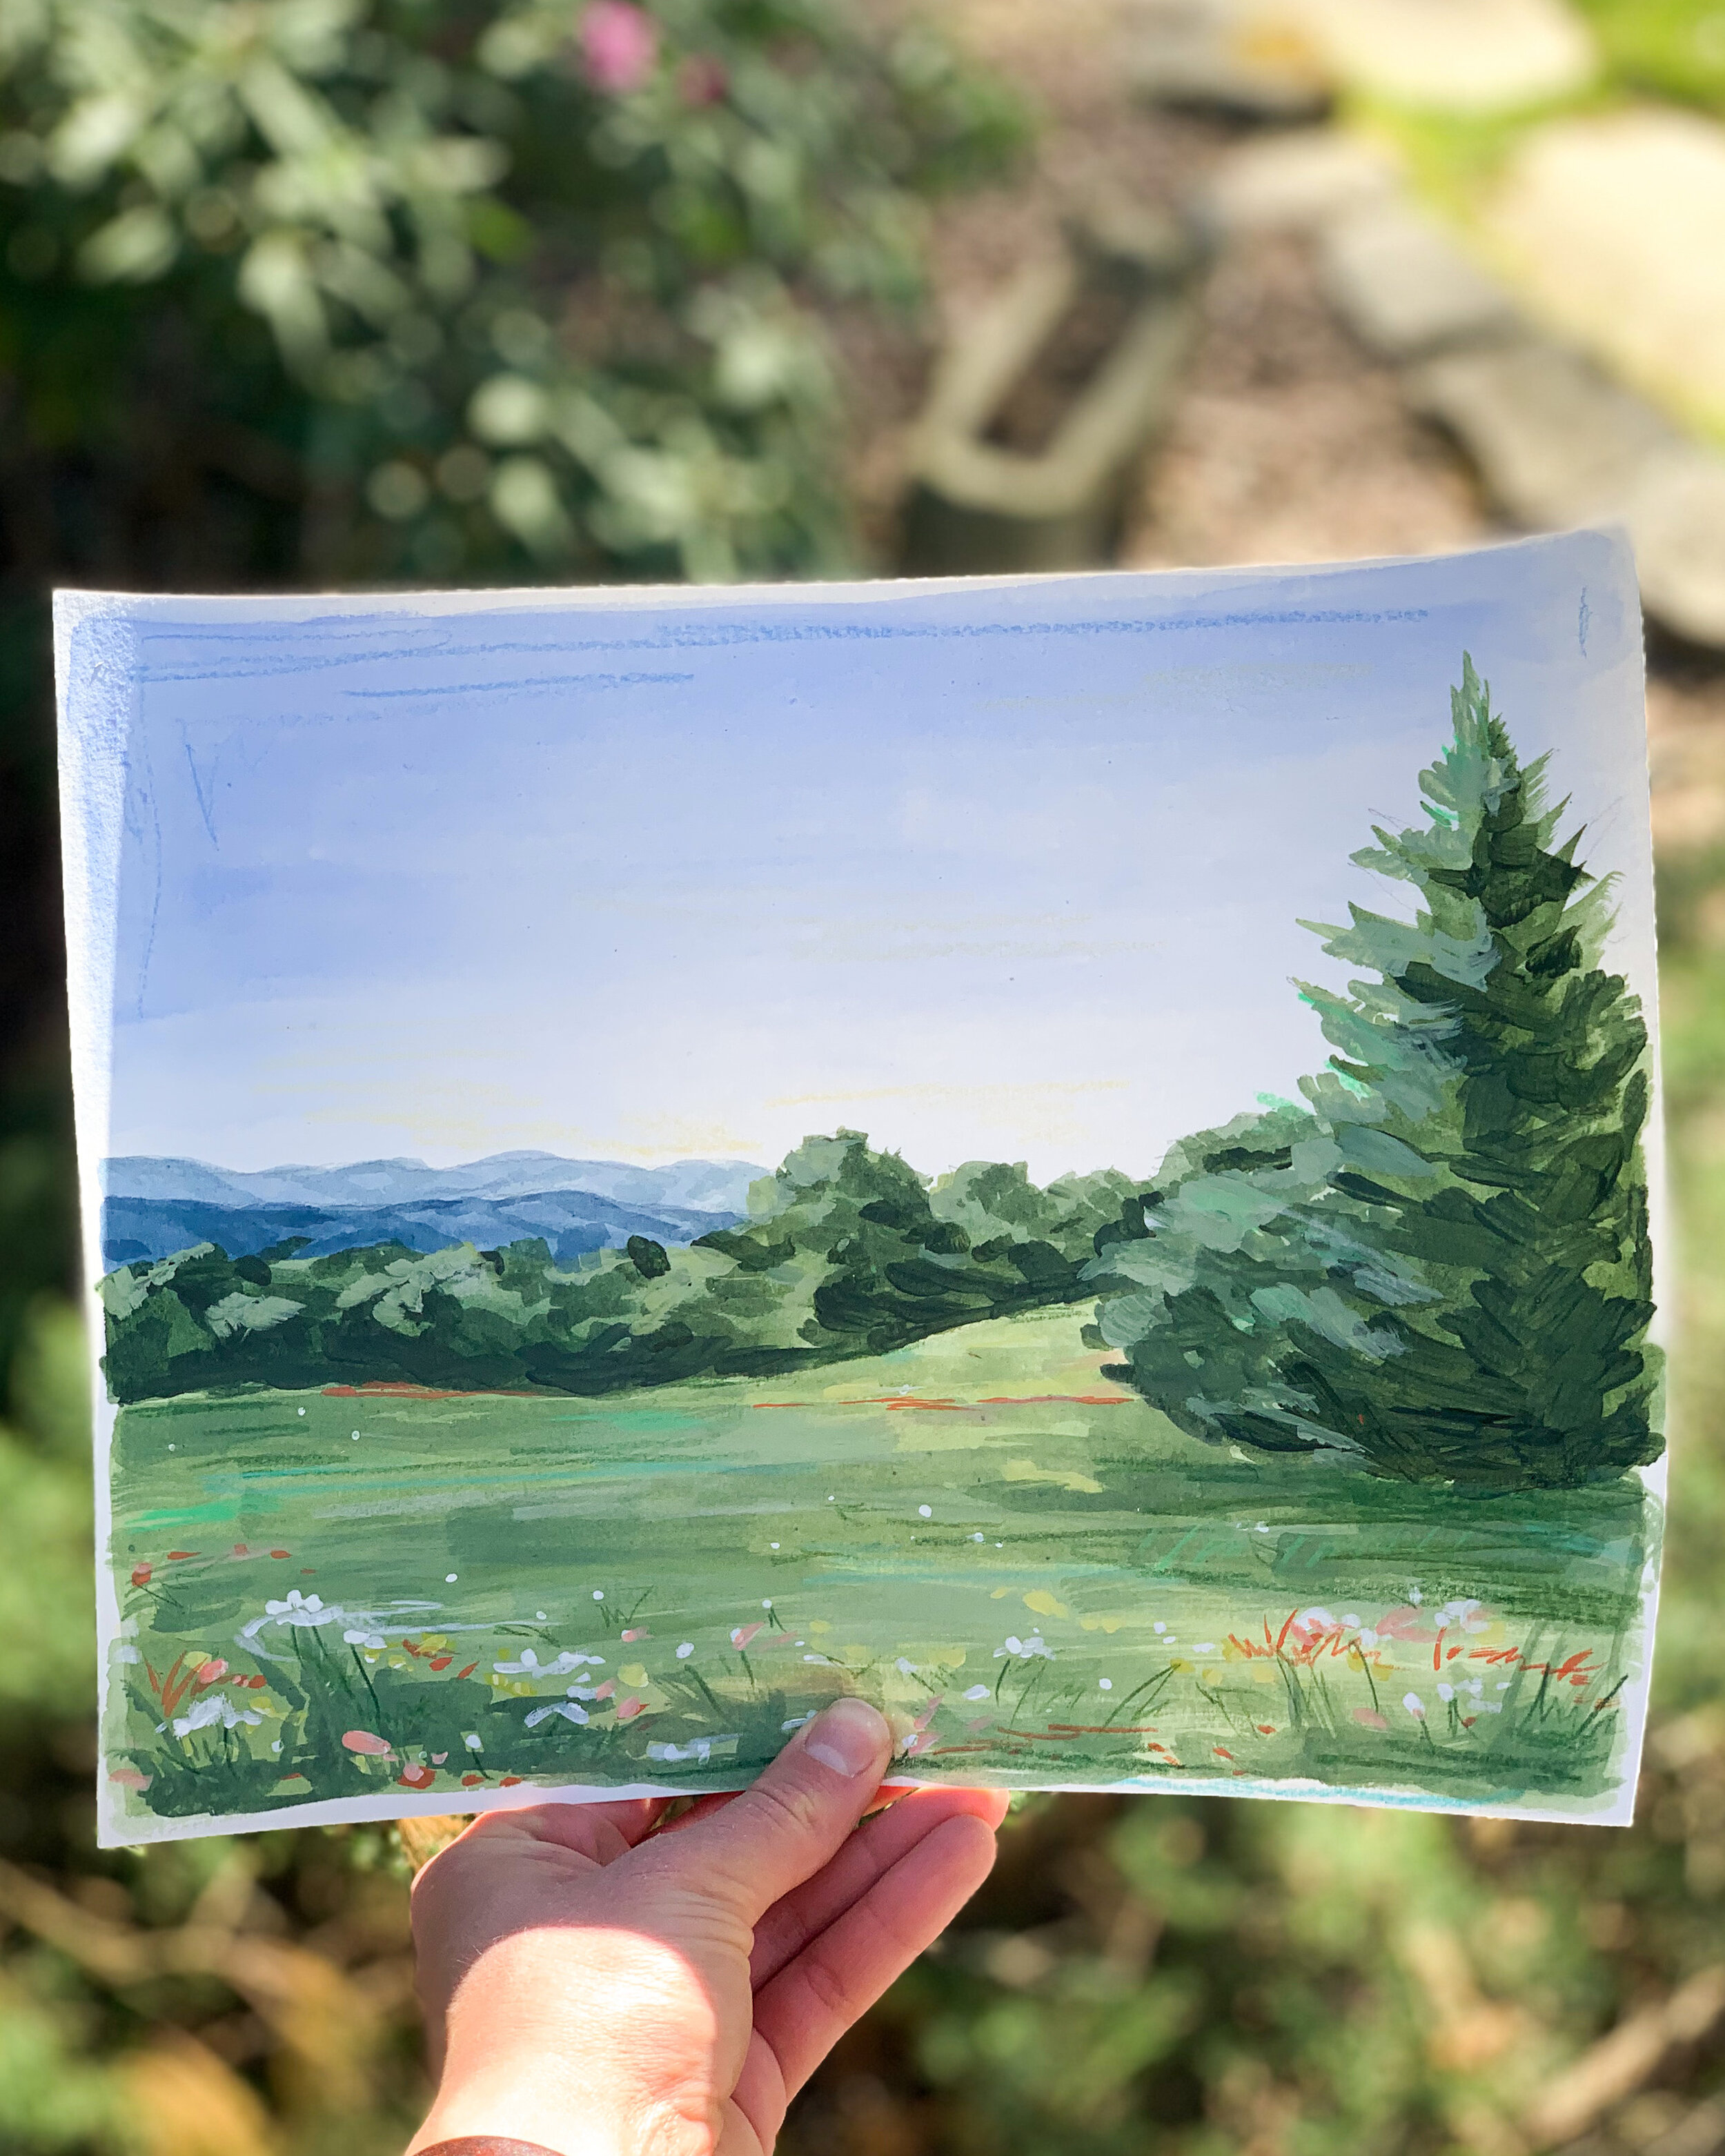 I hosted a landscape painting class on IG live and LOVED getting to paint with everyone!